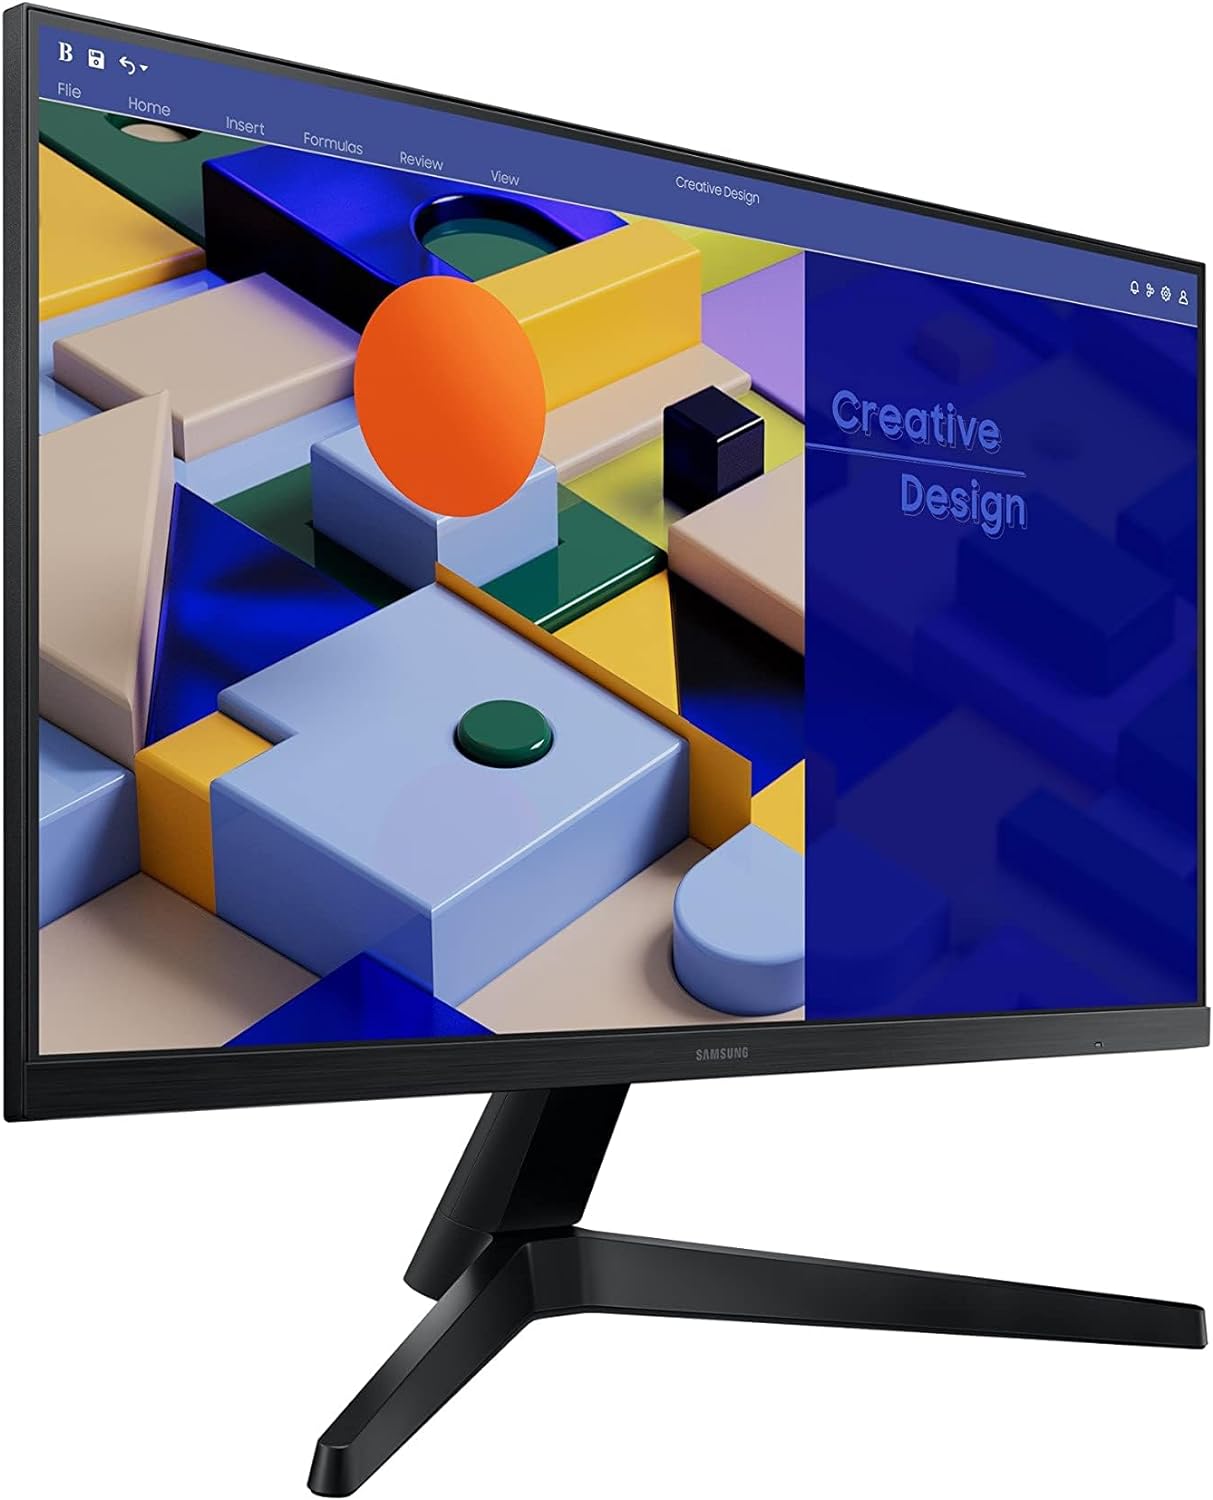 Samsung 27" S3 S31C Essential FHD Flat IPS Monitor (New)